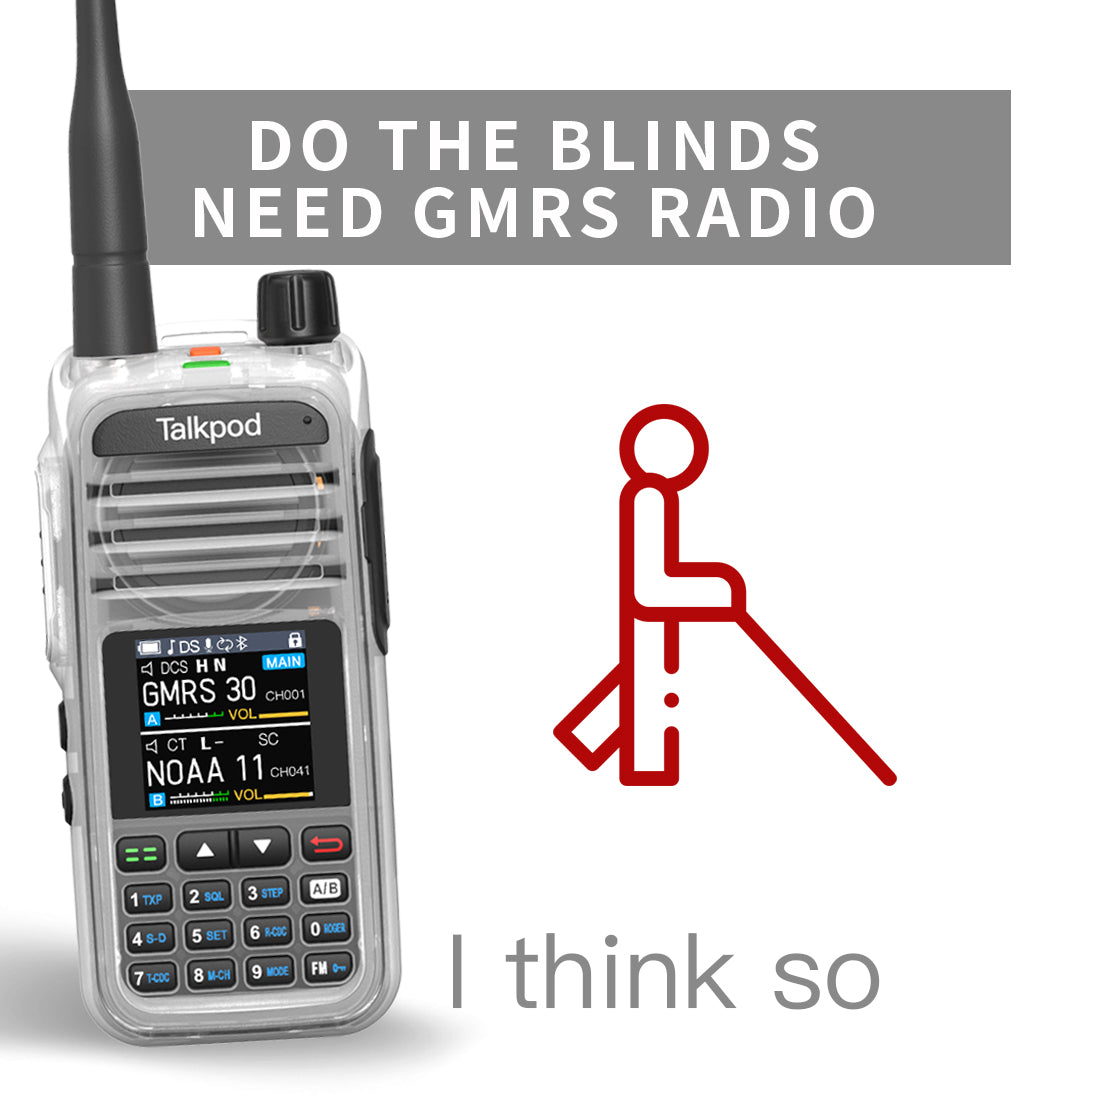 Do GMRS Radios Hold Any Benefits for the Visually Impaired?